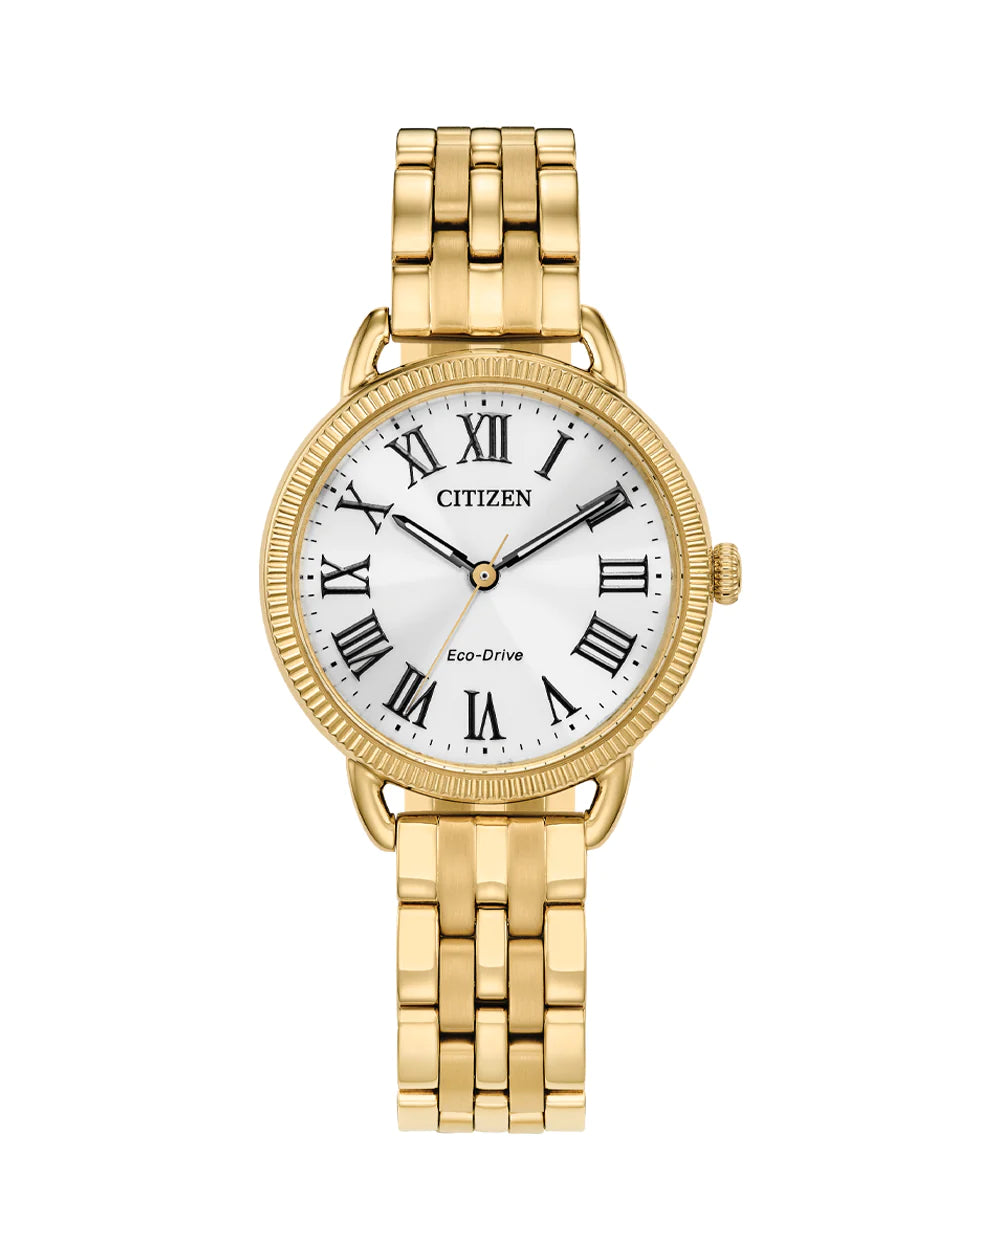 Ladies Gold Eco-Drive Watch with Roman Numerals